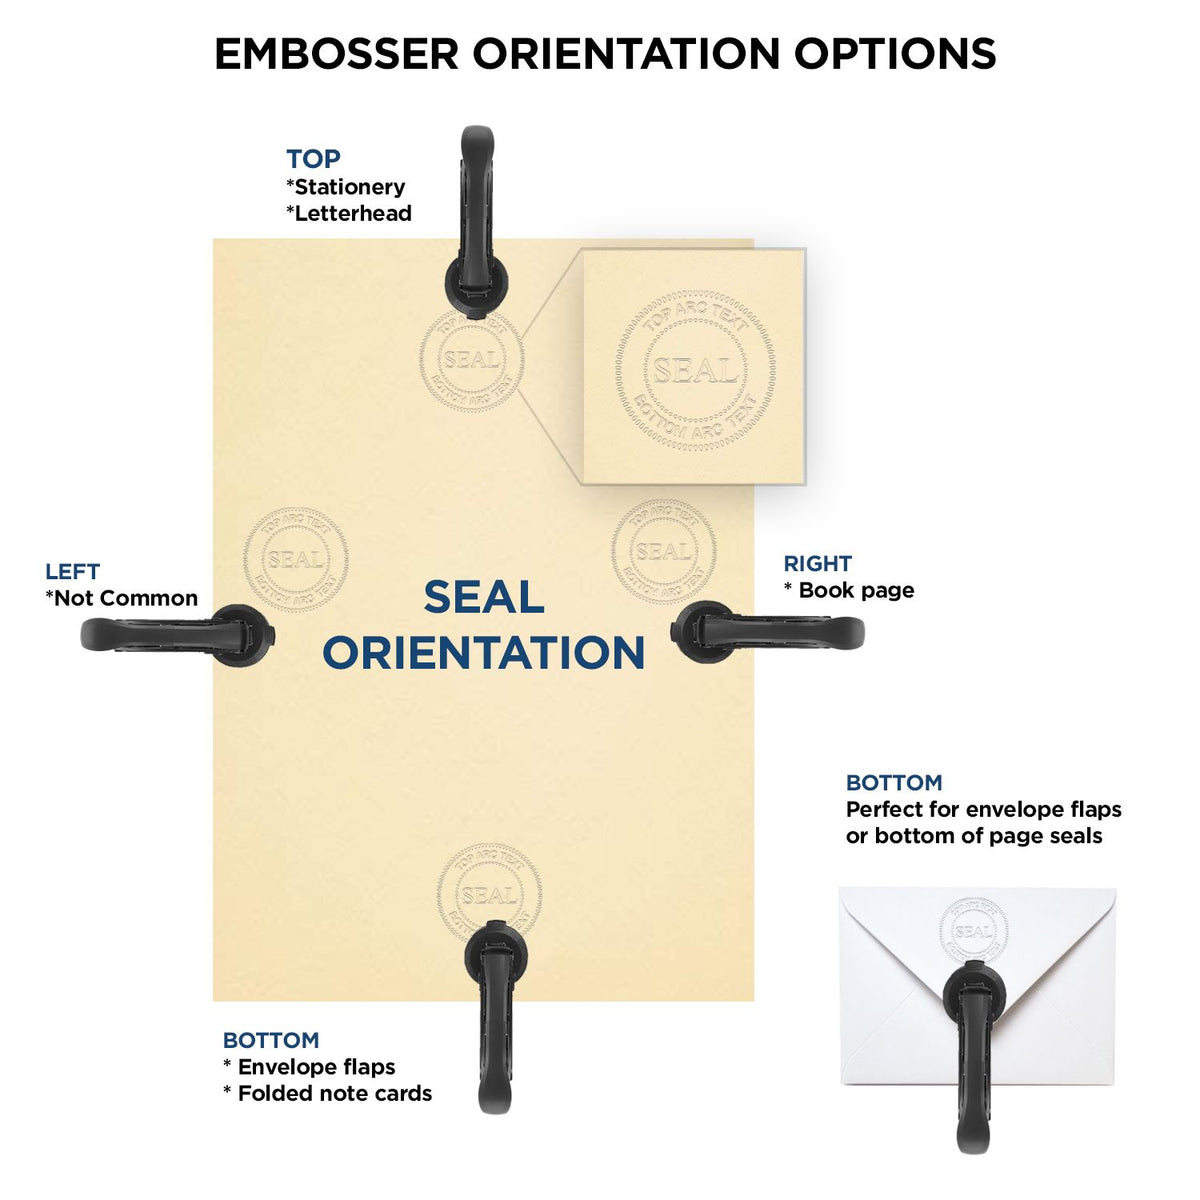 An infographic for the Heavy Duty Cast Iron Mississippi Architect Embosser showing embosser orientation, this is showing examples of a top, bottom, right and left insert.